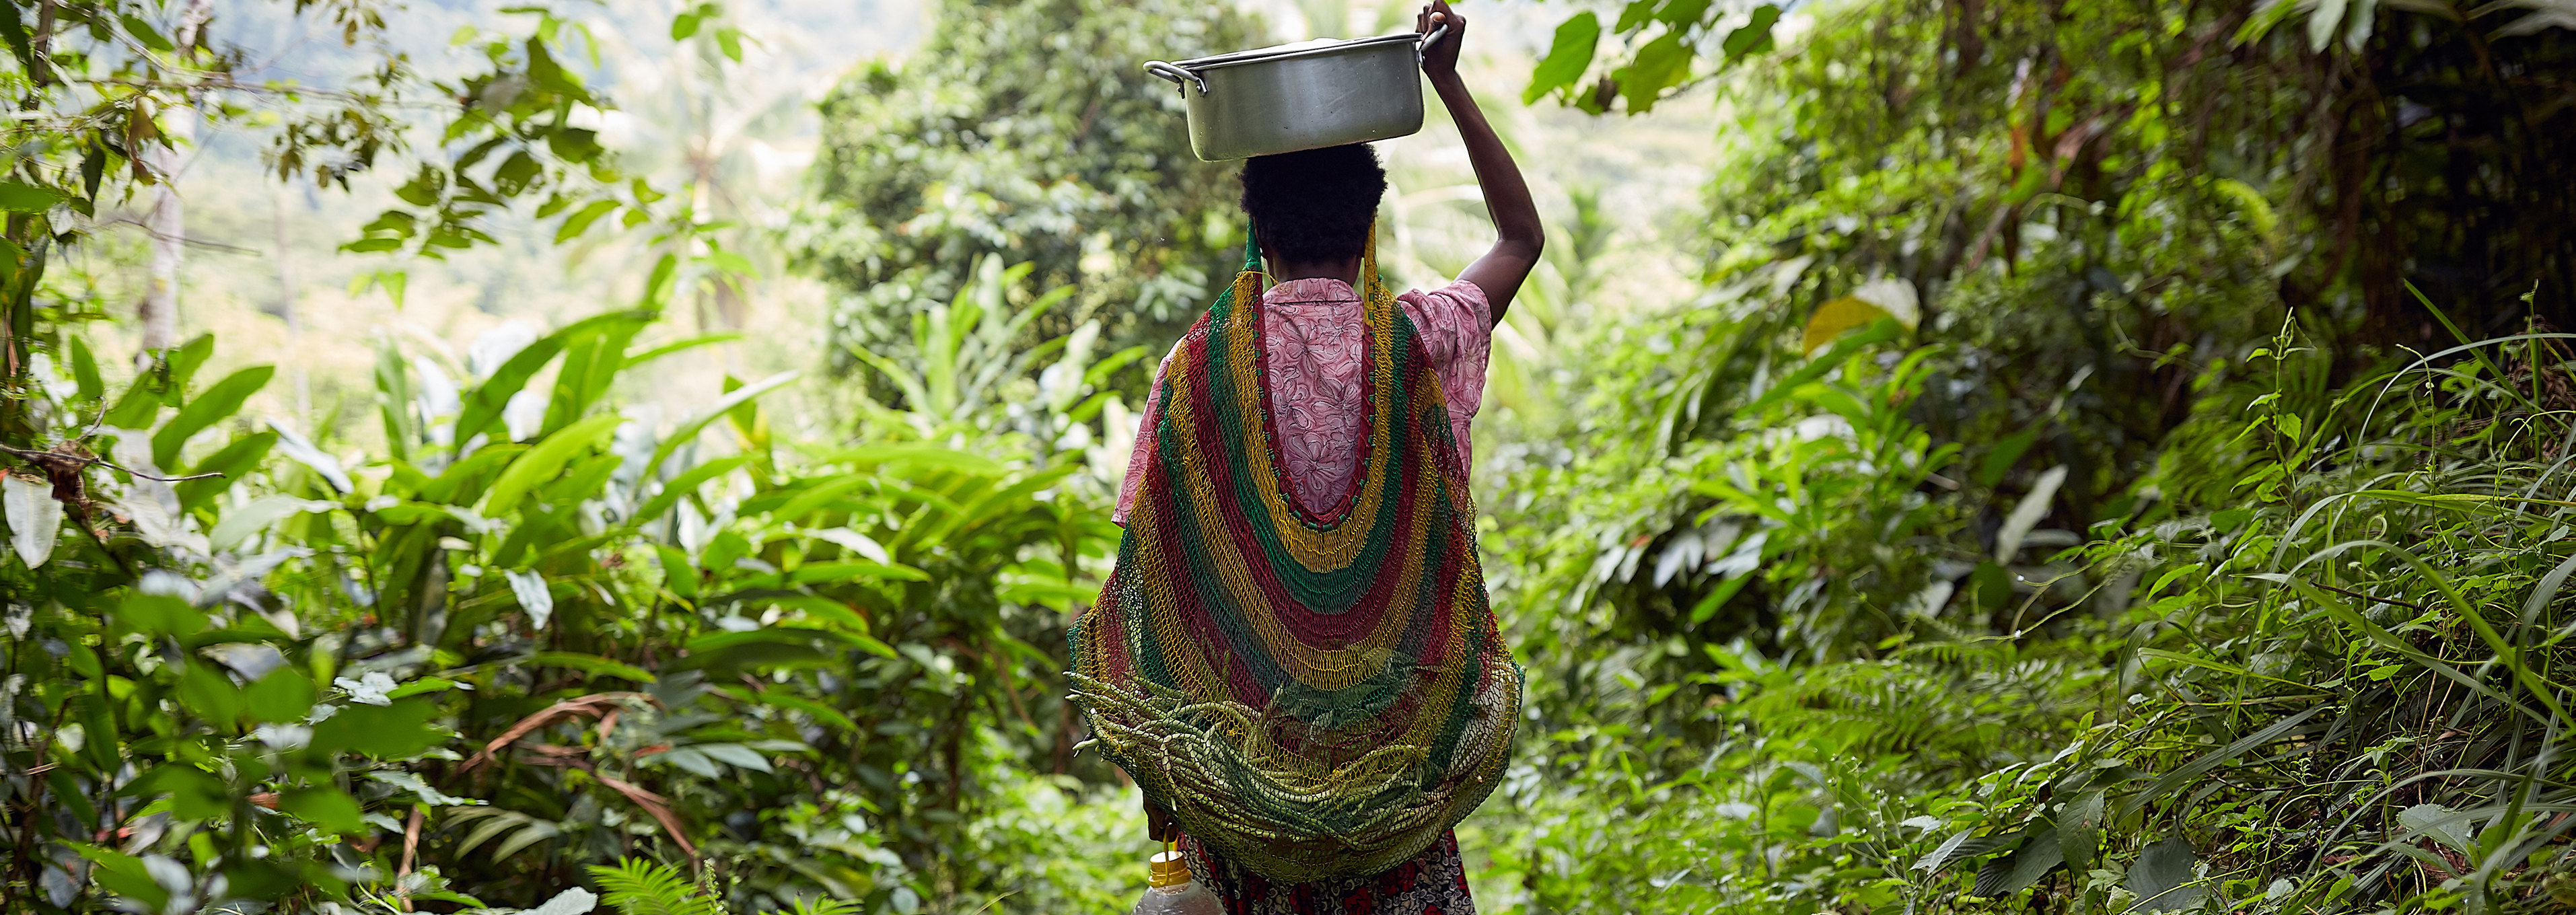 GIVE WATER, SUSTAIN WOMEN: LVRSustainable & Oxfam Italy